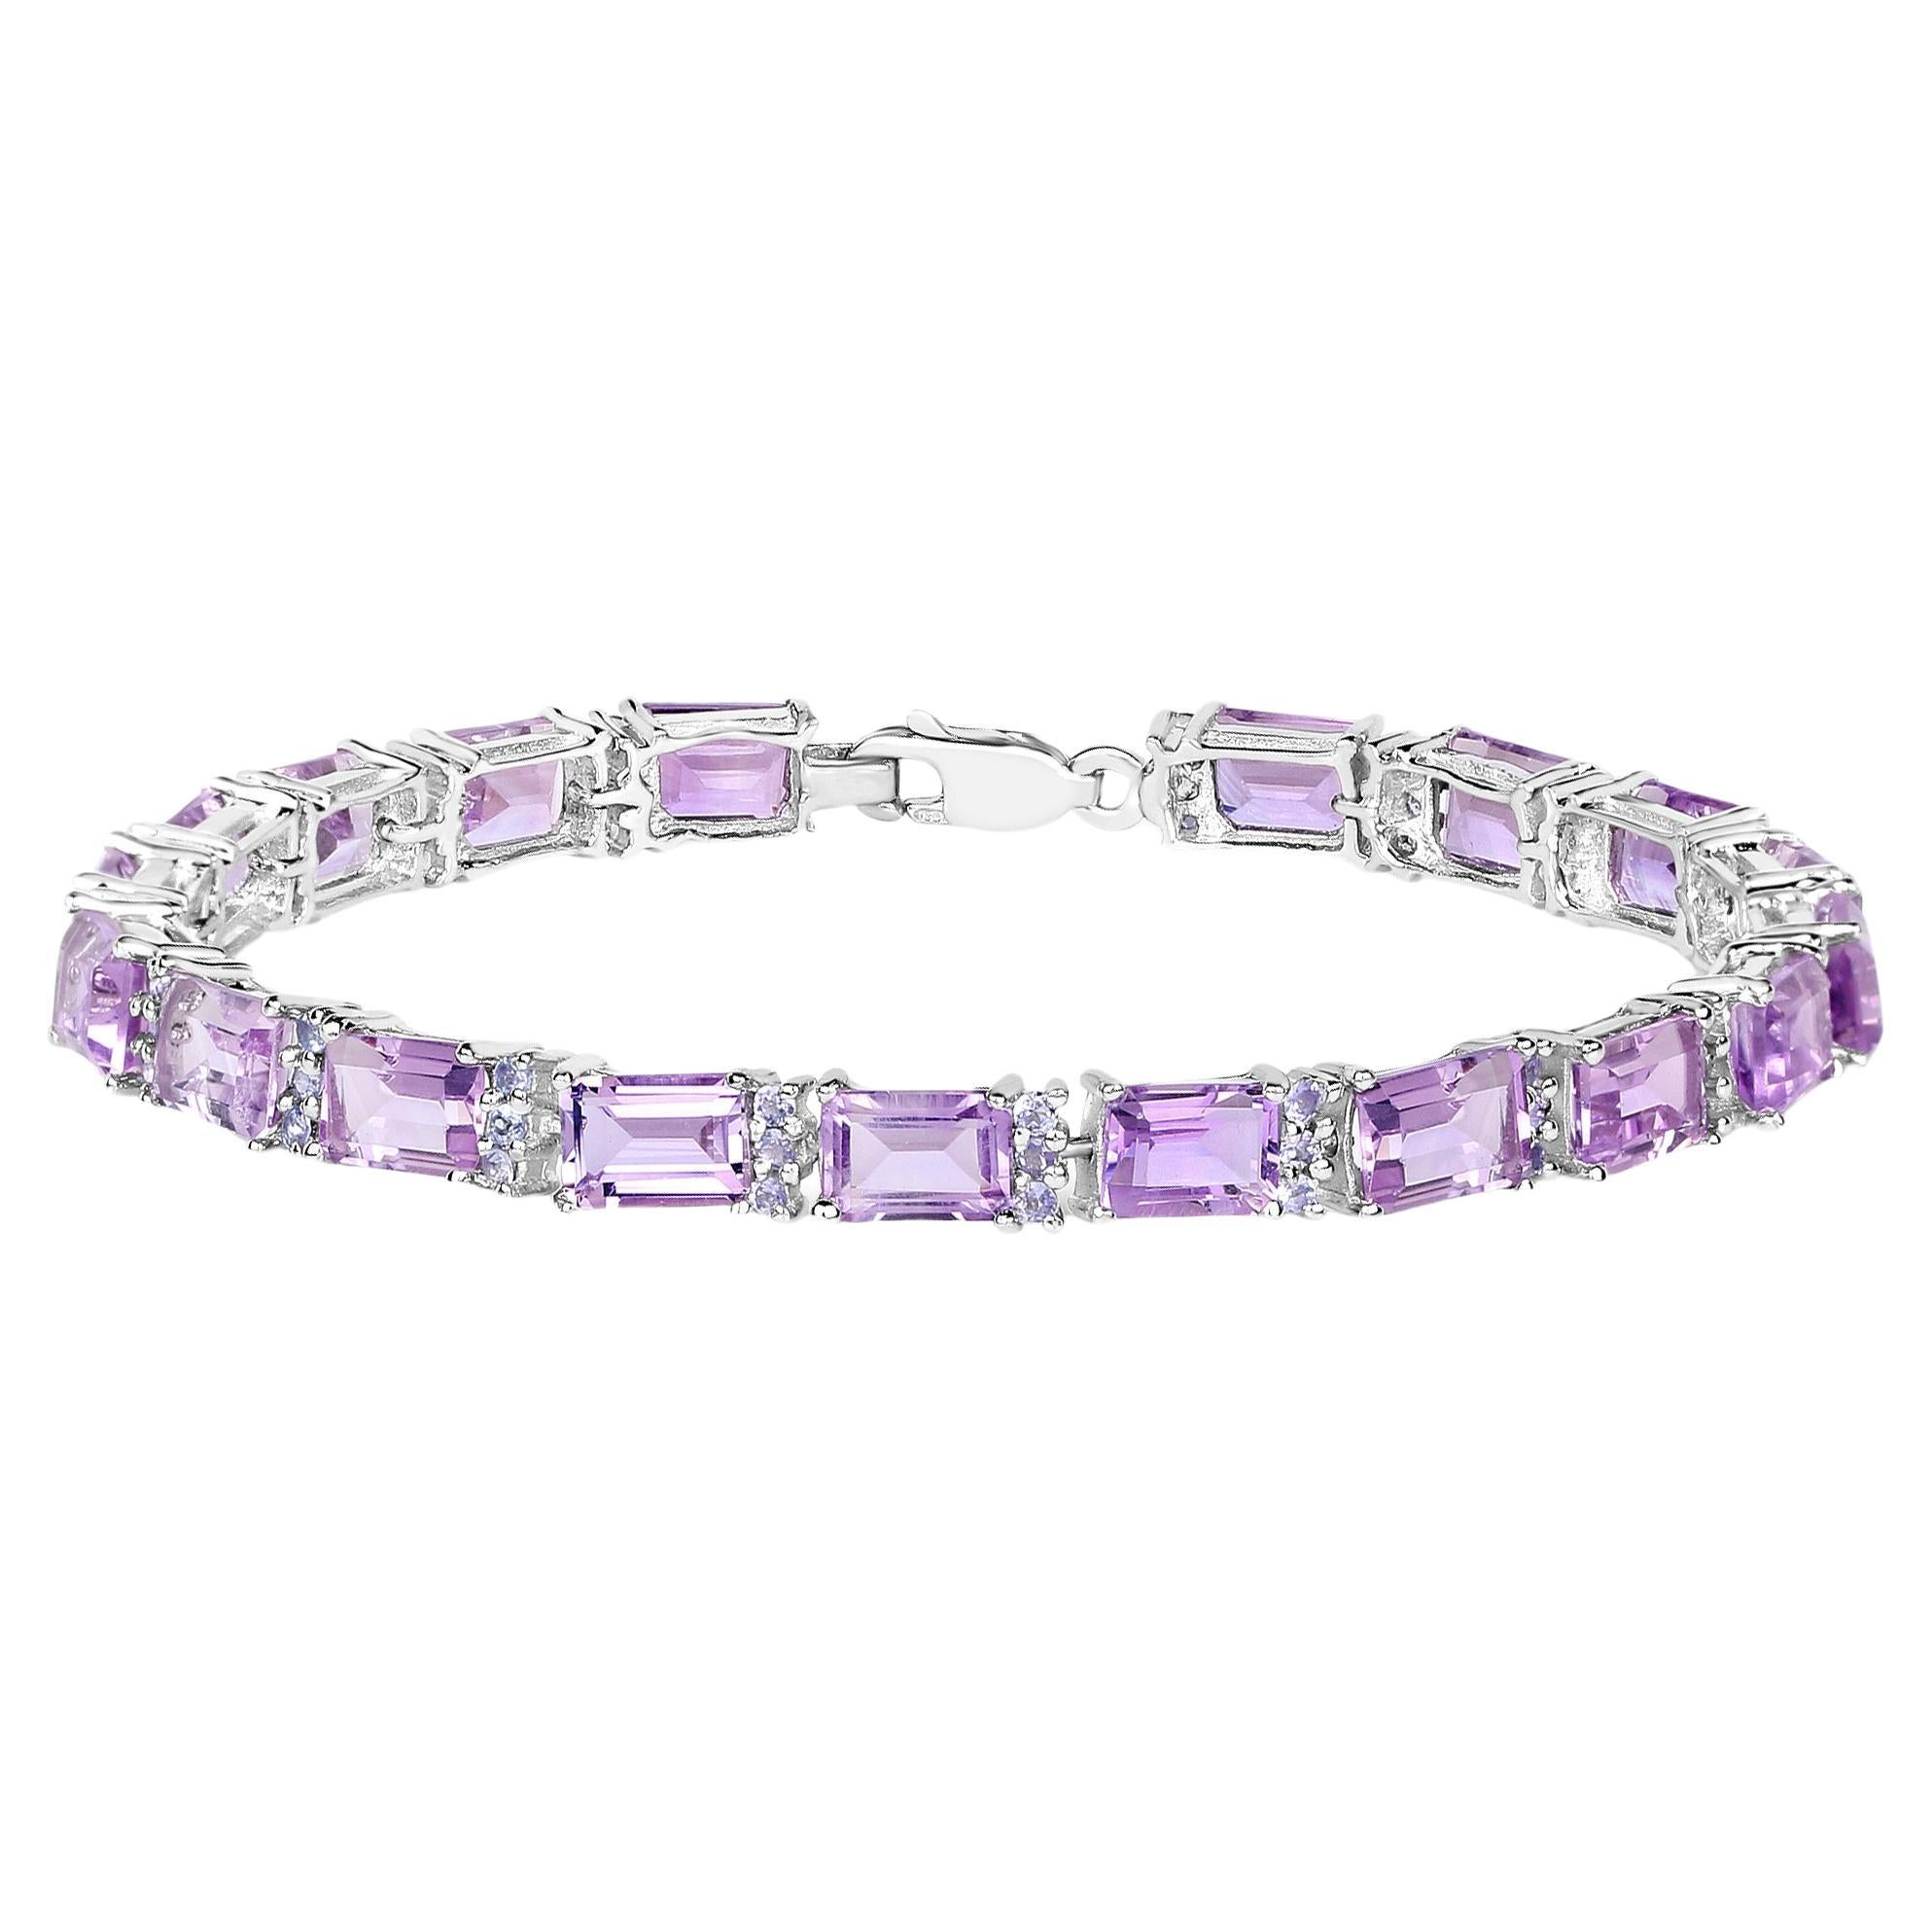 Amethyst Bracelet With Tanzanite 19.19 Carats Rhodium Plated Sterling Silver